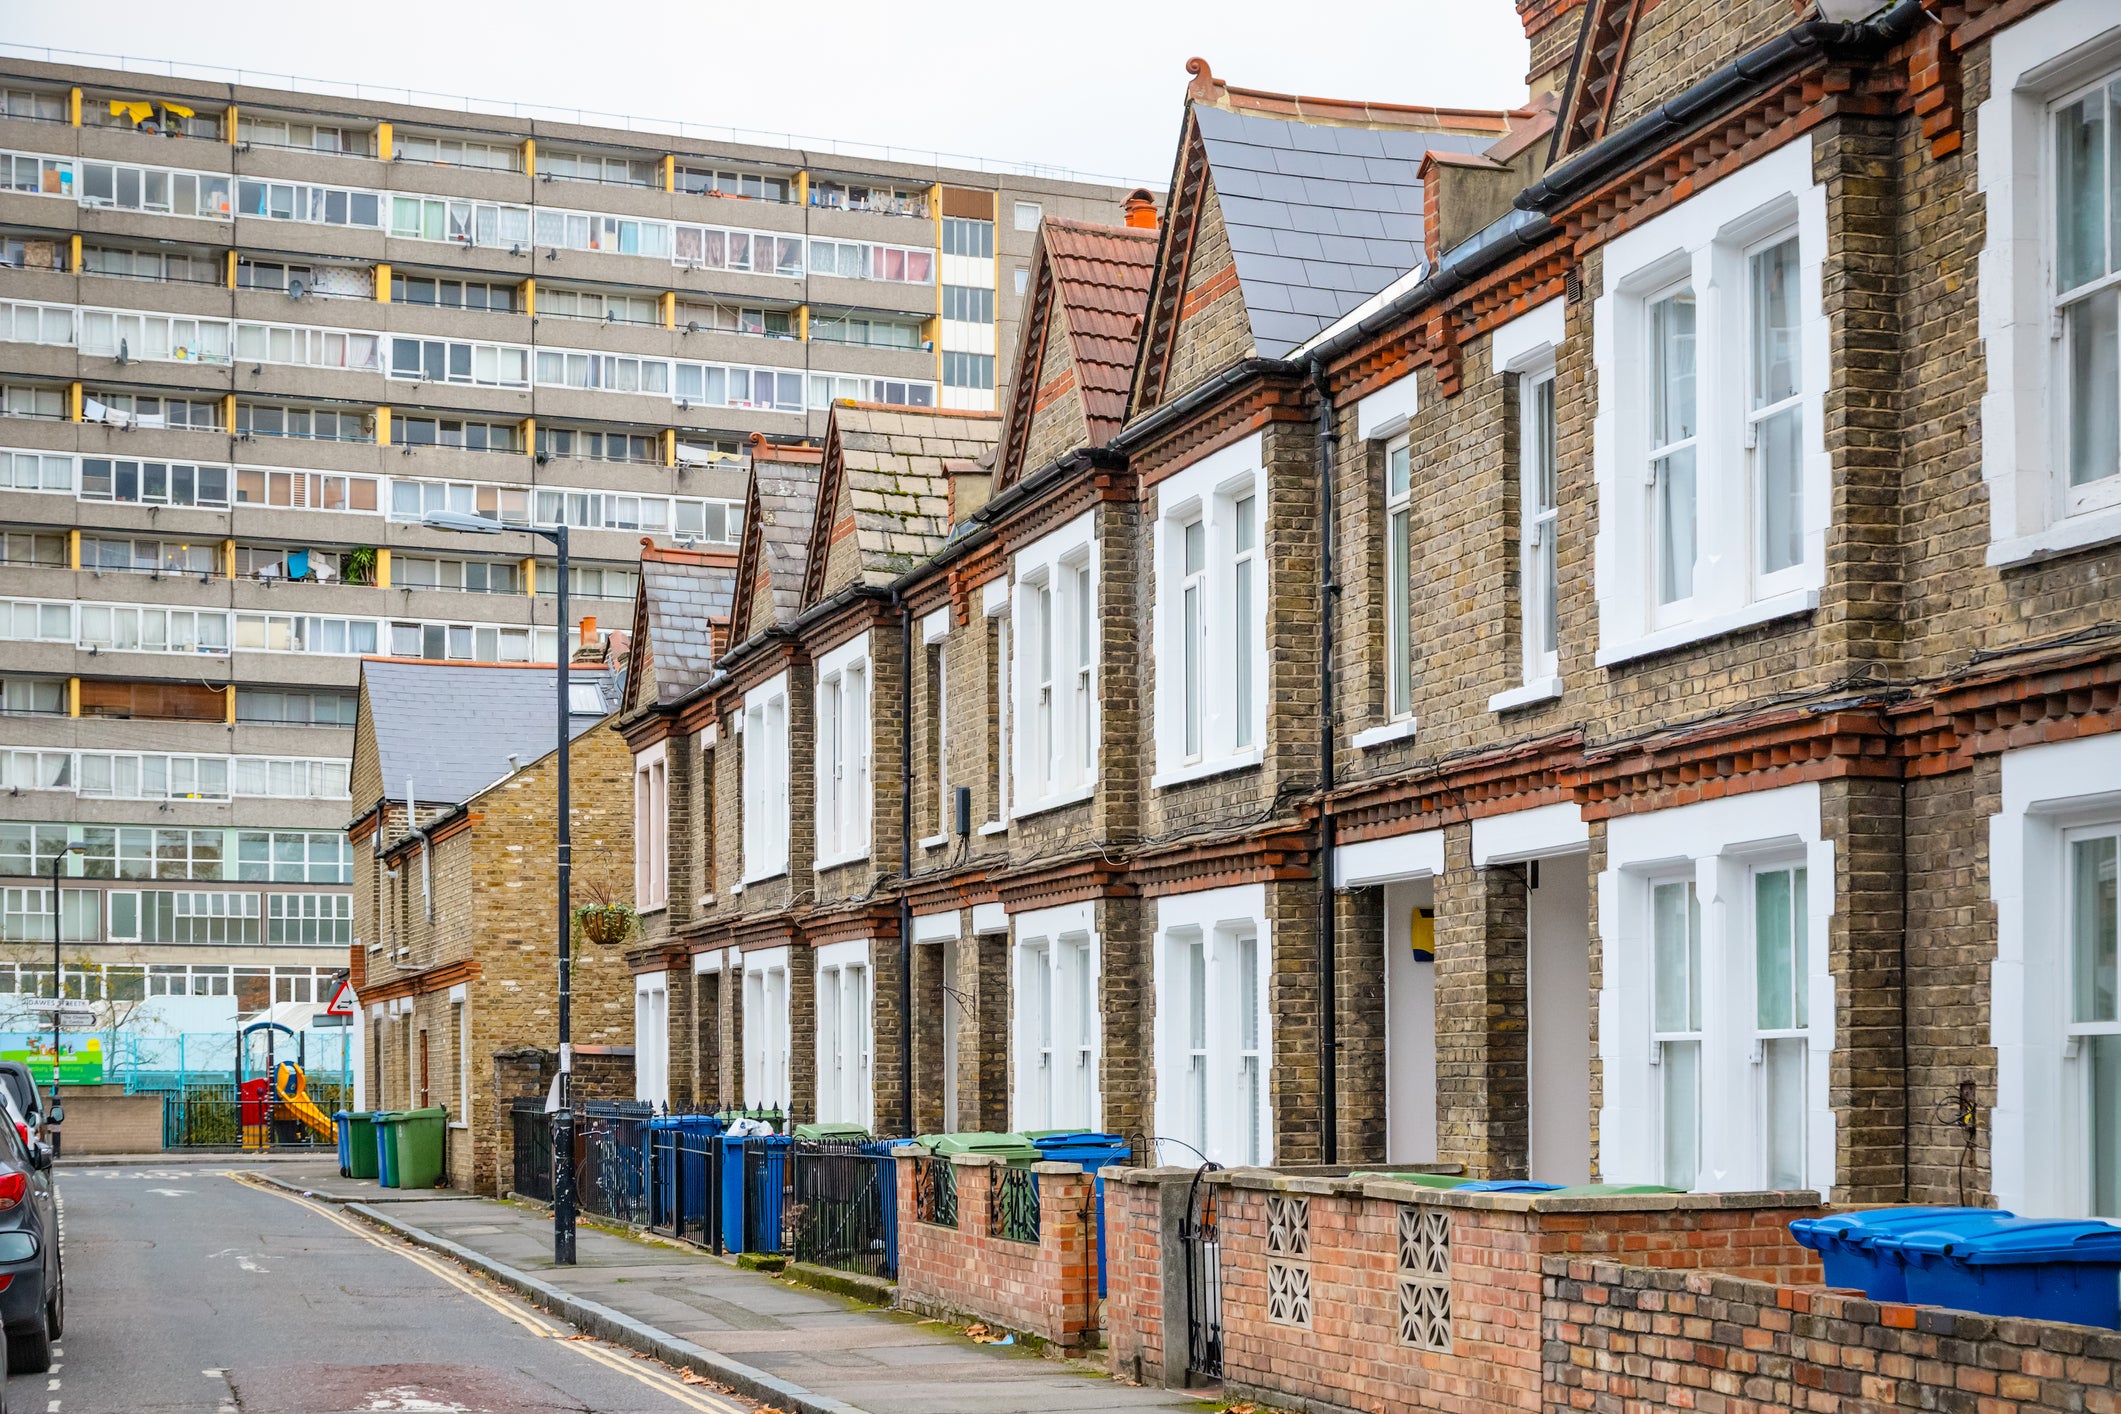 ‘Many people today would jump at the opportunity to rent a property from their local authority’